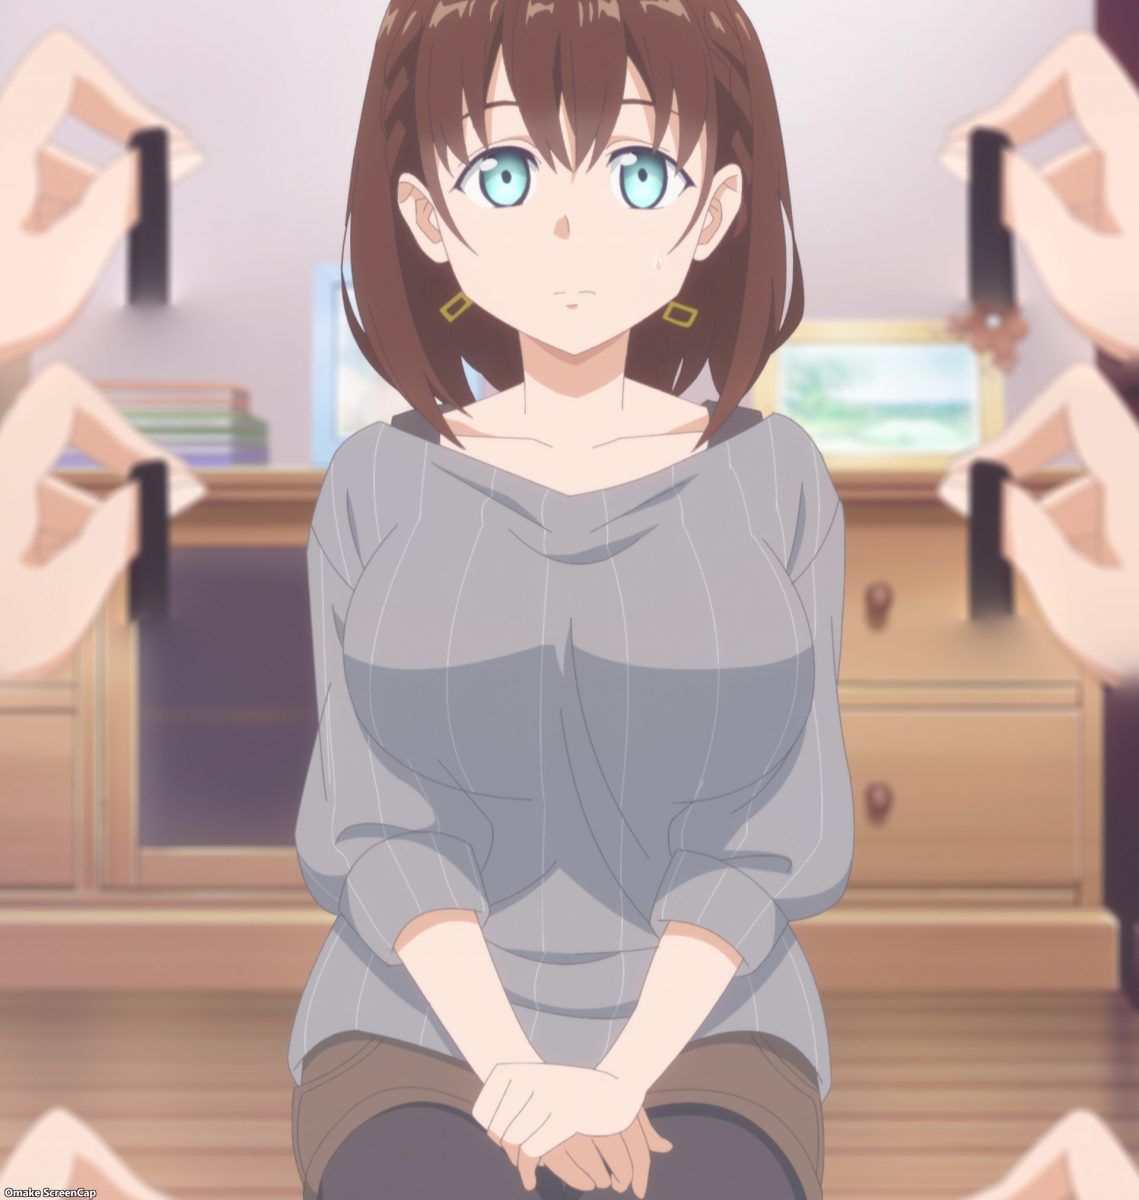 Tawawa On Monday Two Episode 7 Aichan Sits On Floor